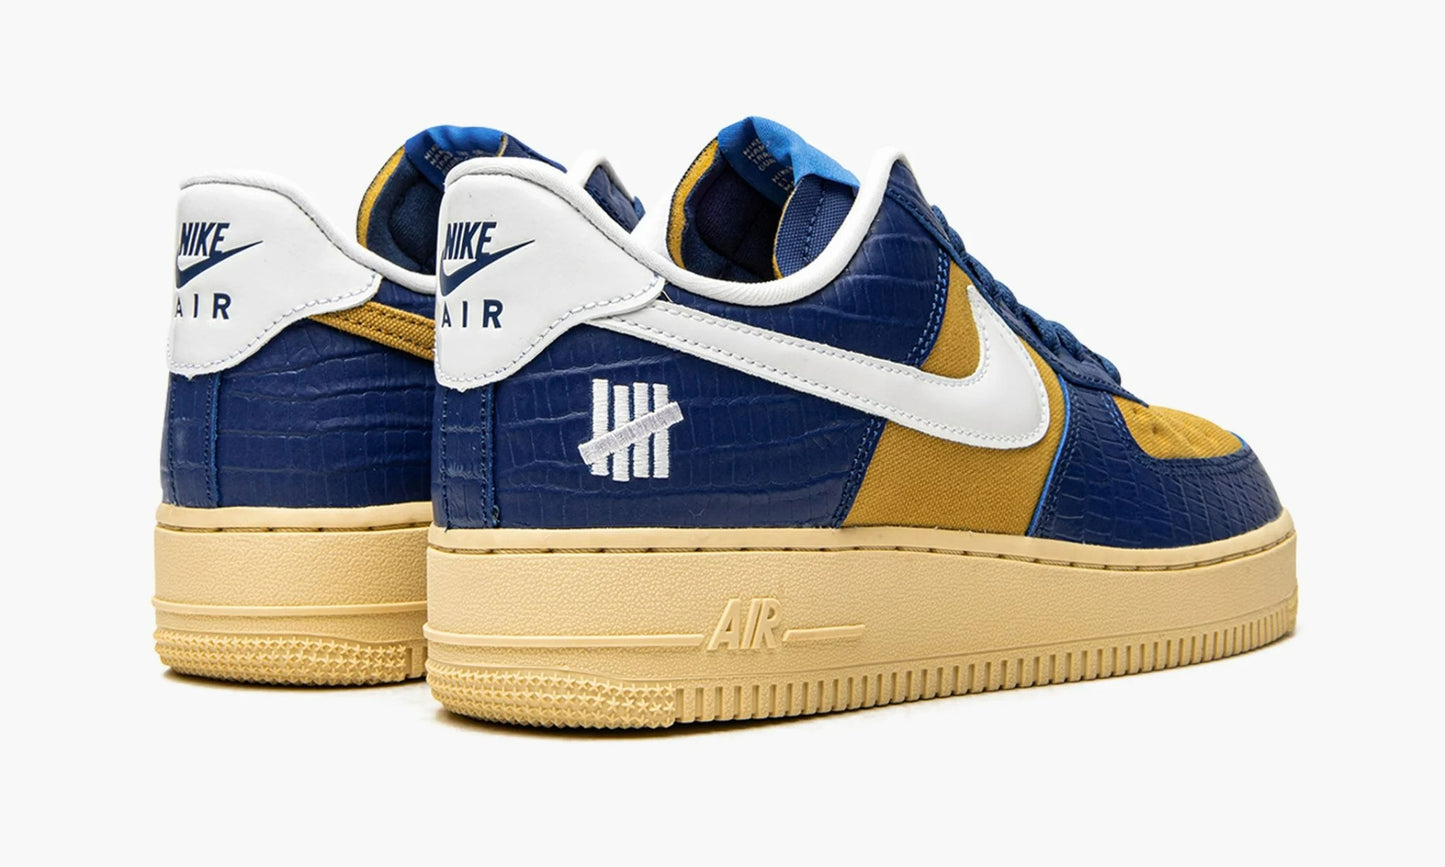 Air Force 1 Low SP UNDFTD 5 On It Blue Yellow Croc - DM8462 400